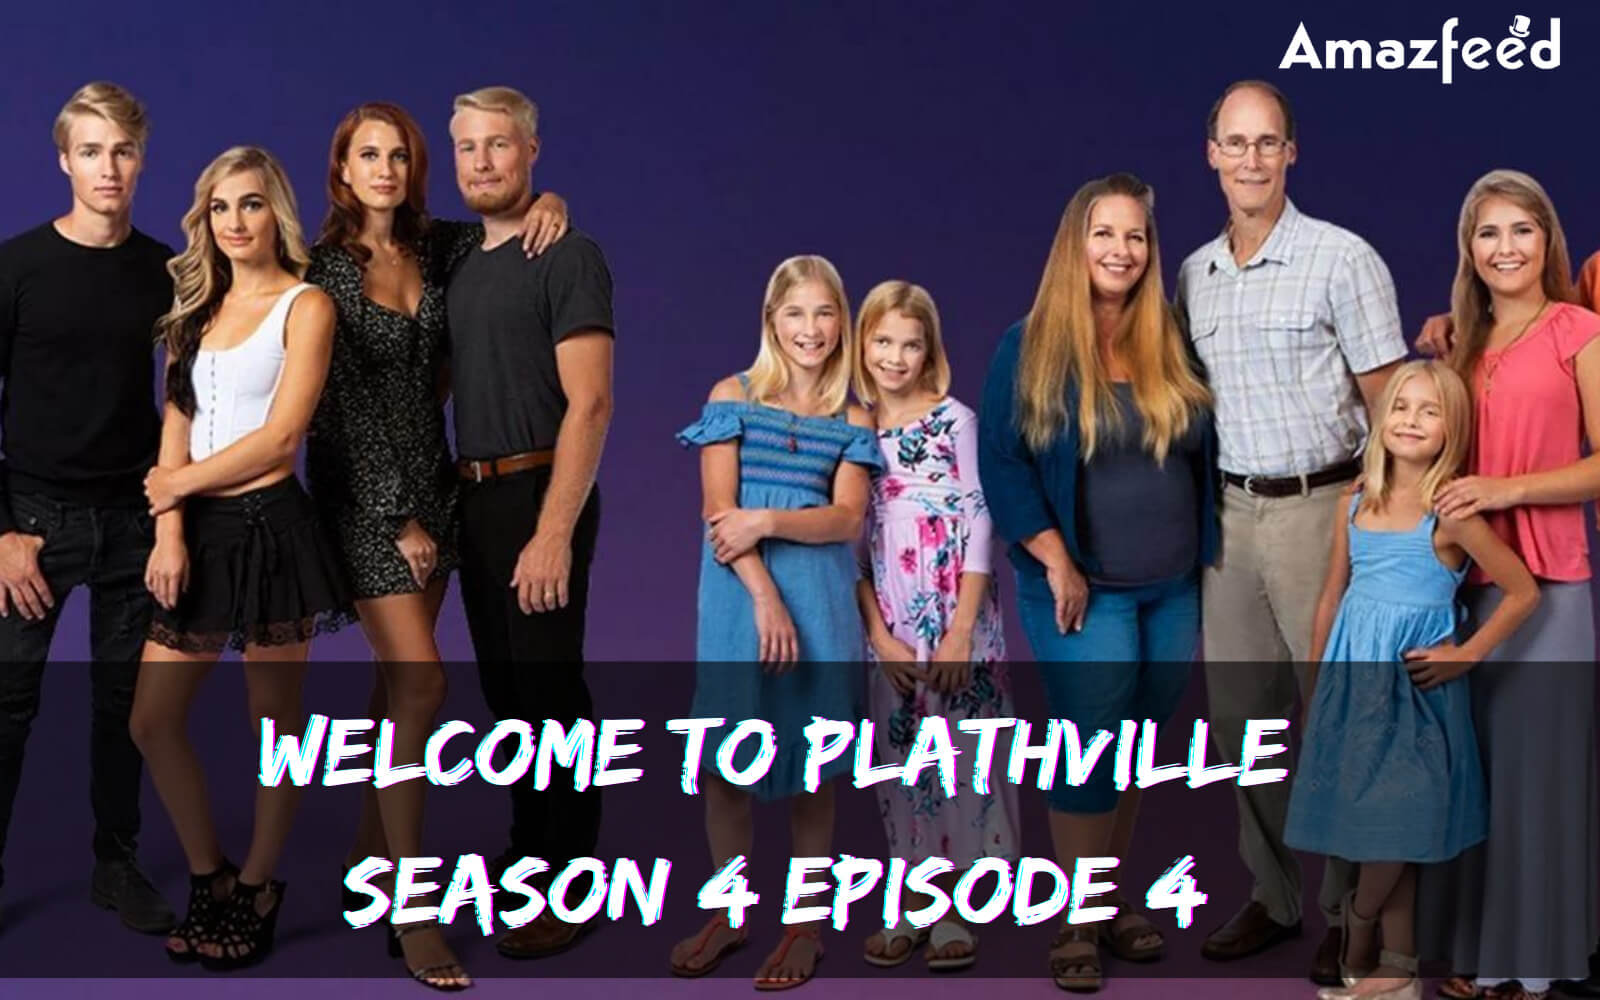 Welcome to Plathville season 4 Episode 4 release date